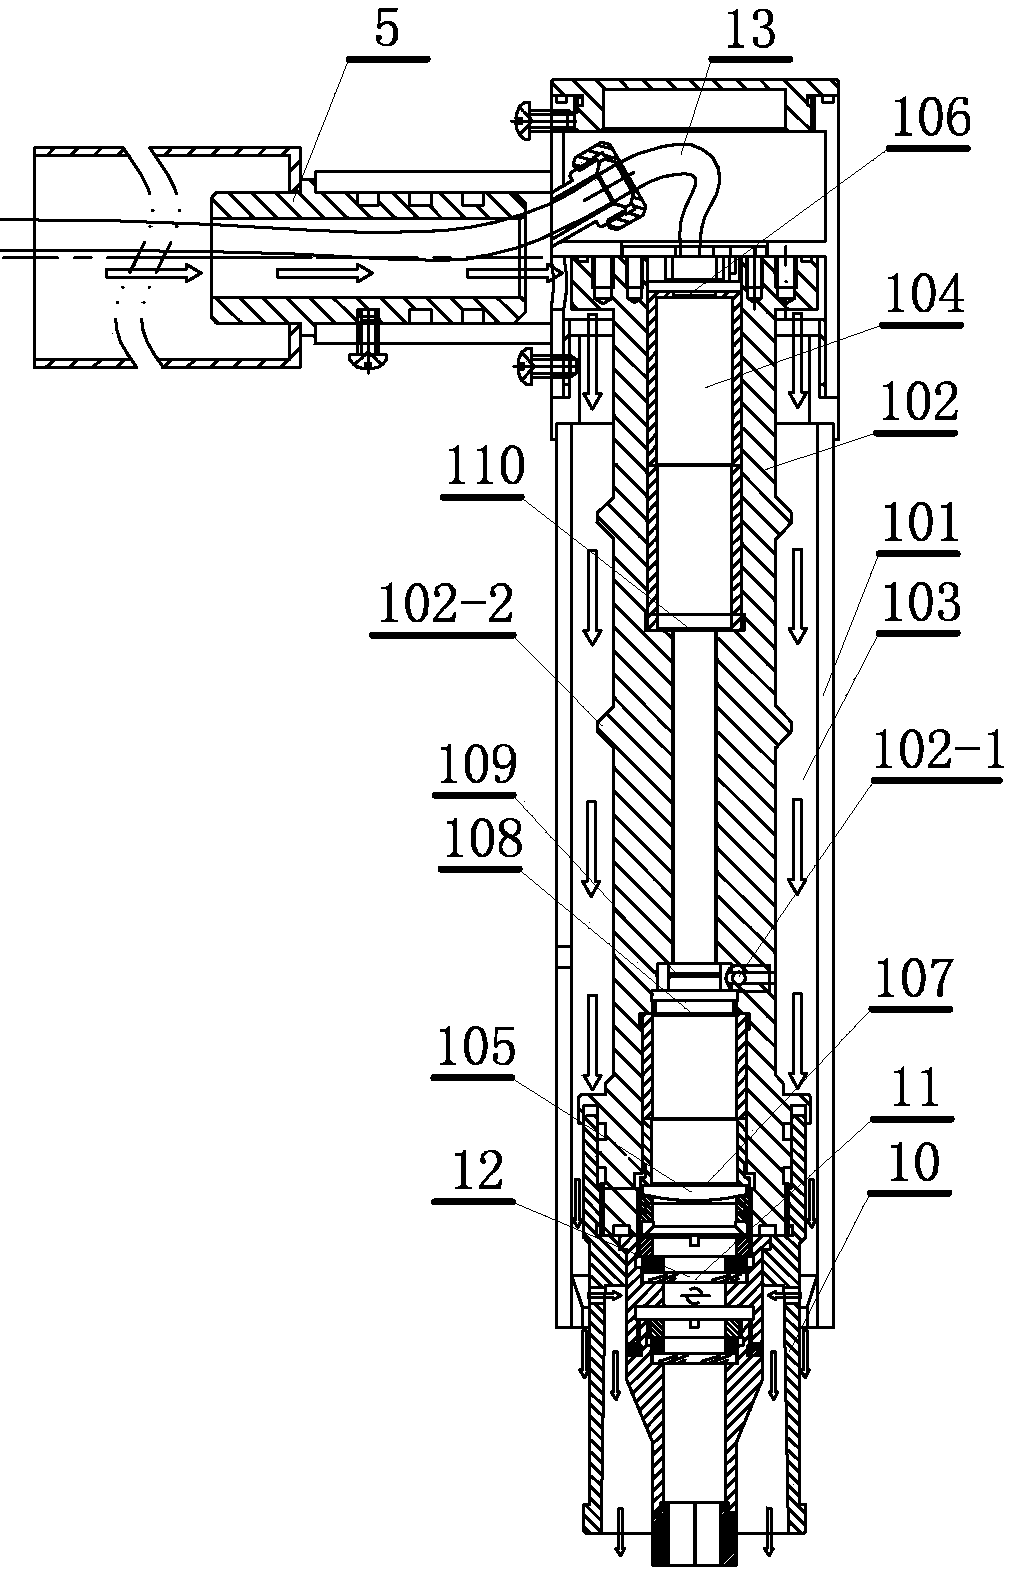 Continuous temperature measuring device for molten steel in steel ladle